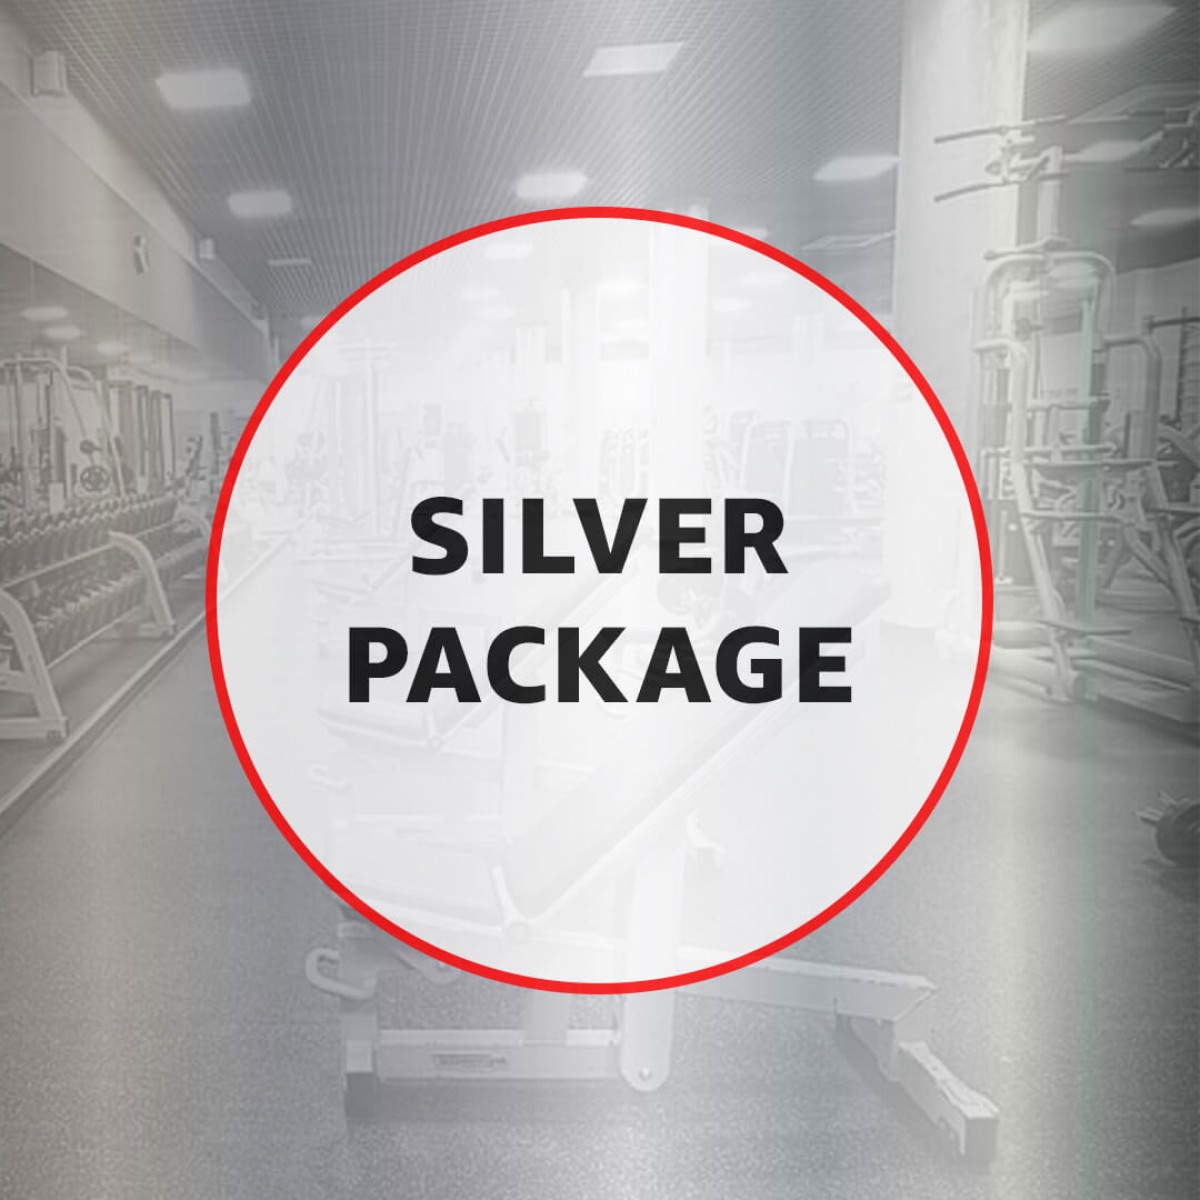 Society, Building & Club House - Silver Package